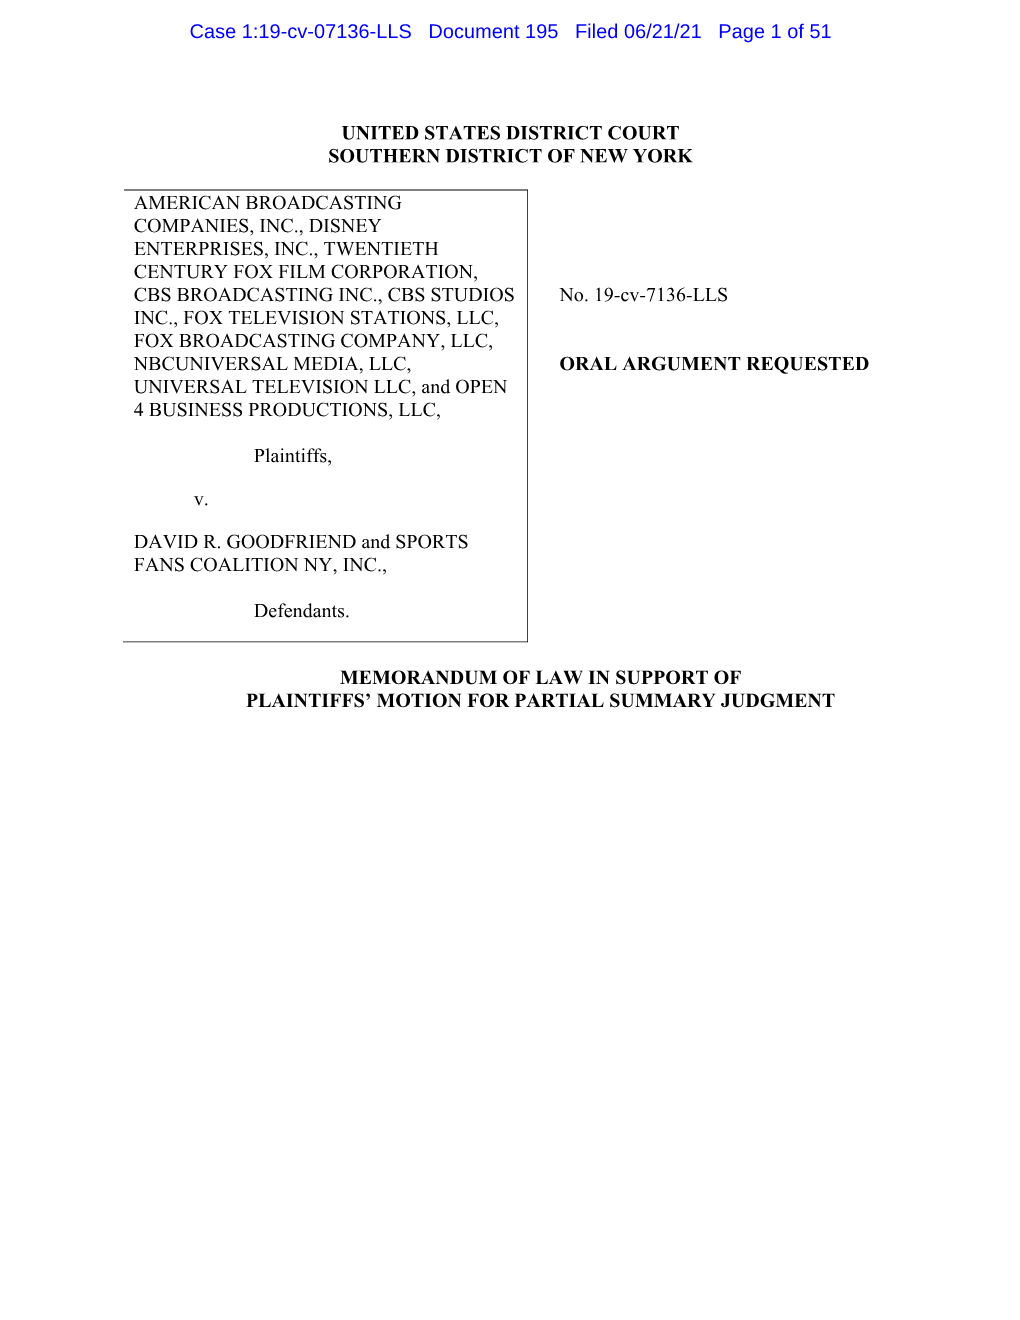 Case 1:19-Cv-07136-LLS Document 195 Filed 06/21/21 Page 1 of 51